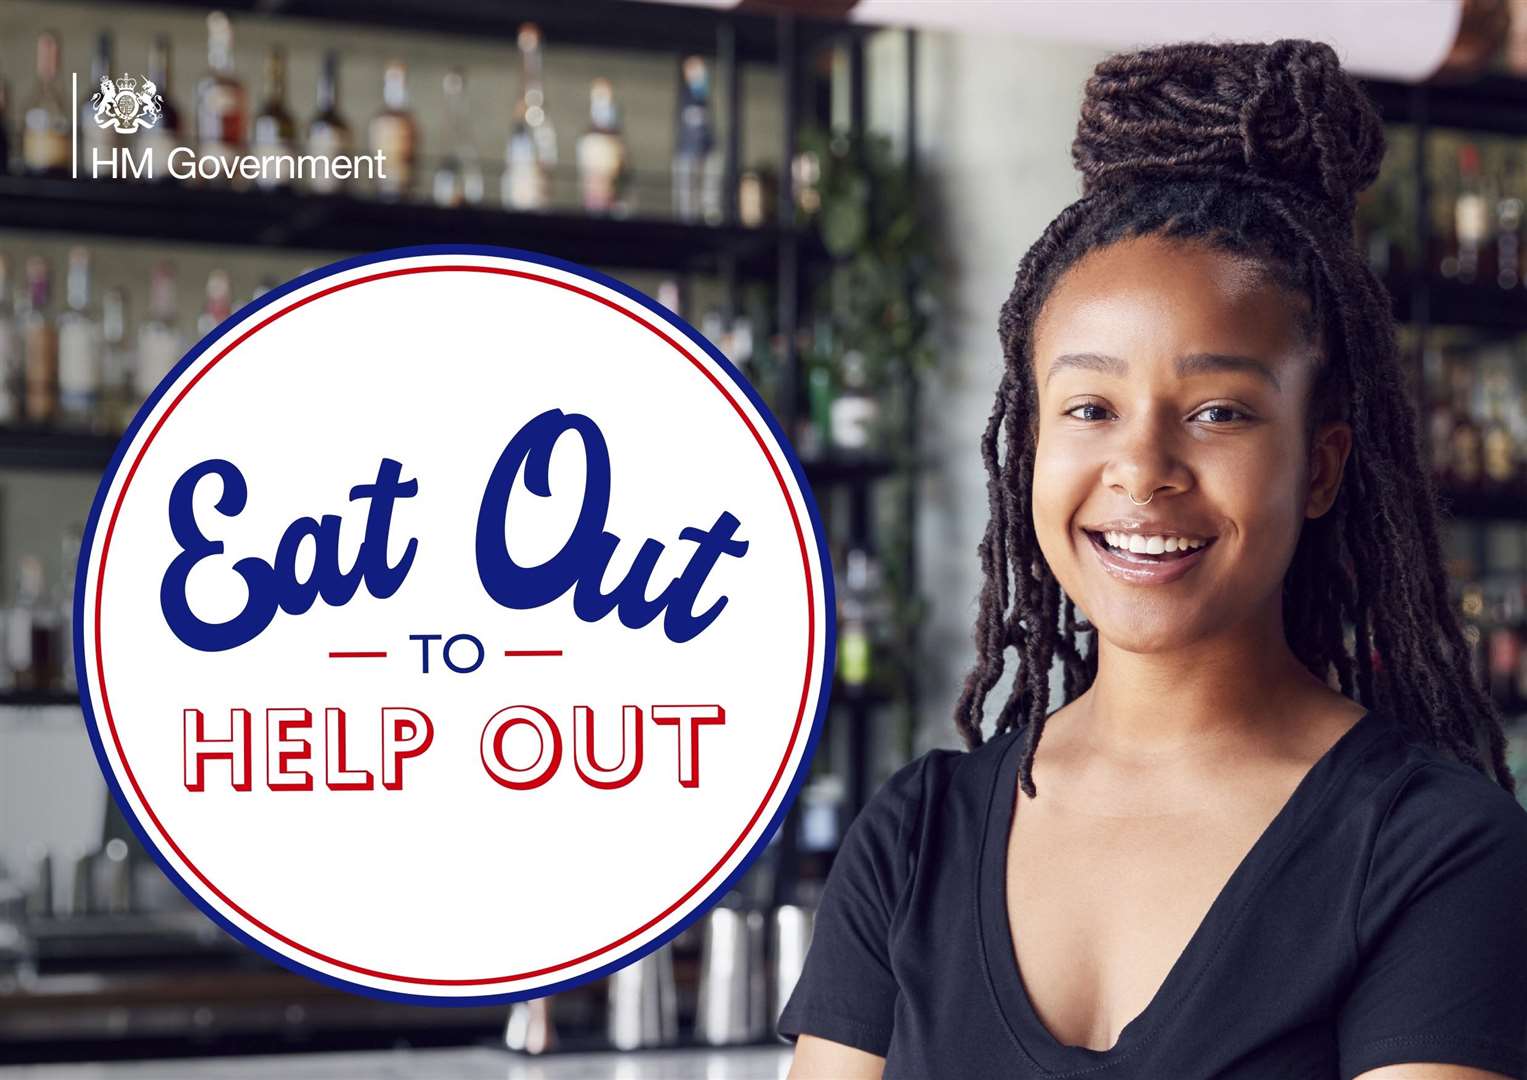 Eat out to Help out scheme starts today in the strath and across the UK.